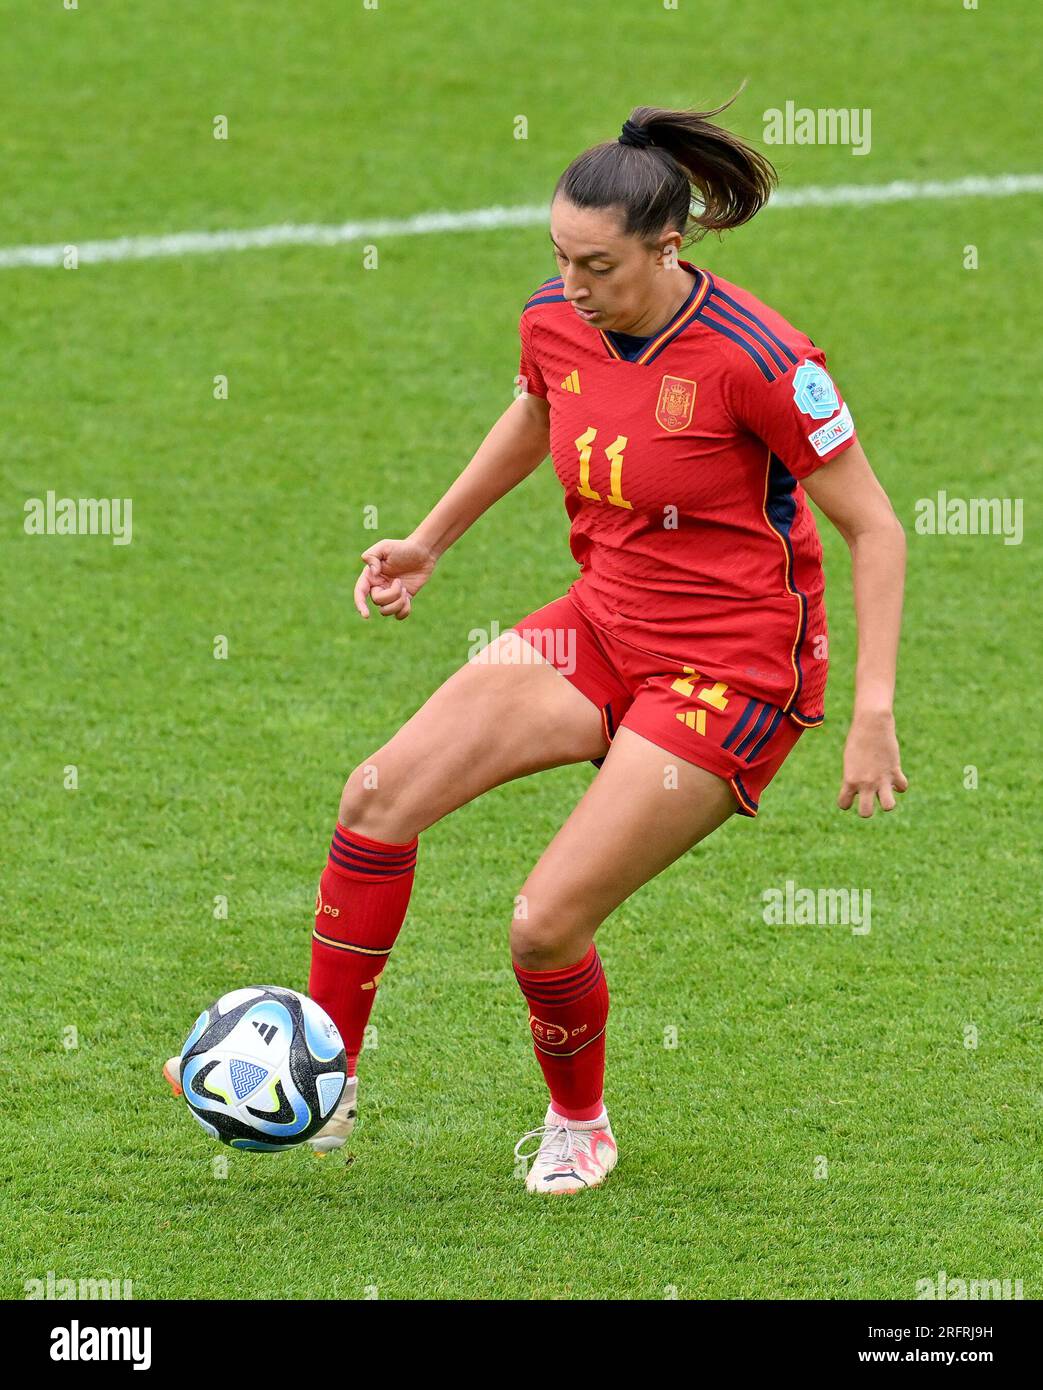 Fiamma Benitez (11) of Spain pictured during a female soccer game between  the national women under 19 teams of Spain and Germany at the UEFA Women's  Under-19 EURO Final on Friday 30